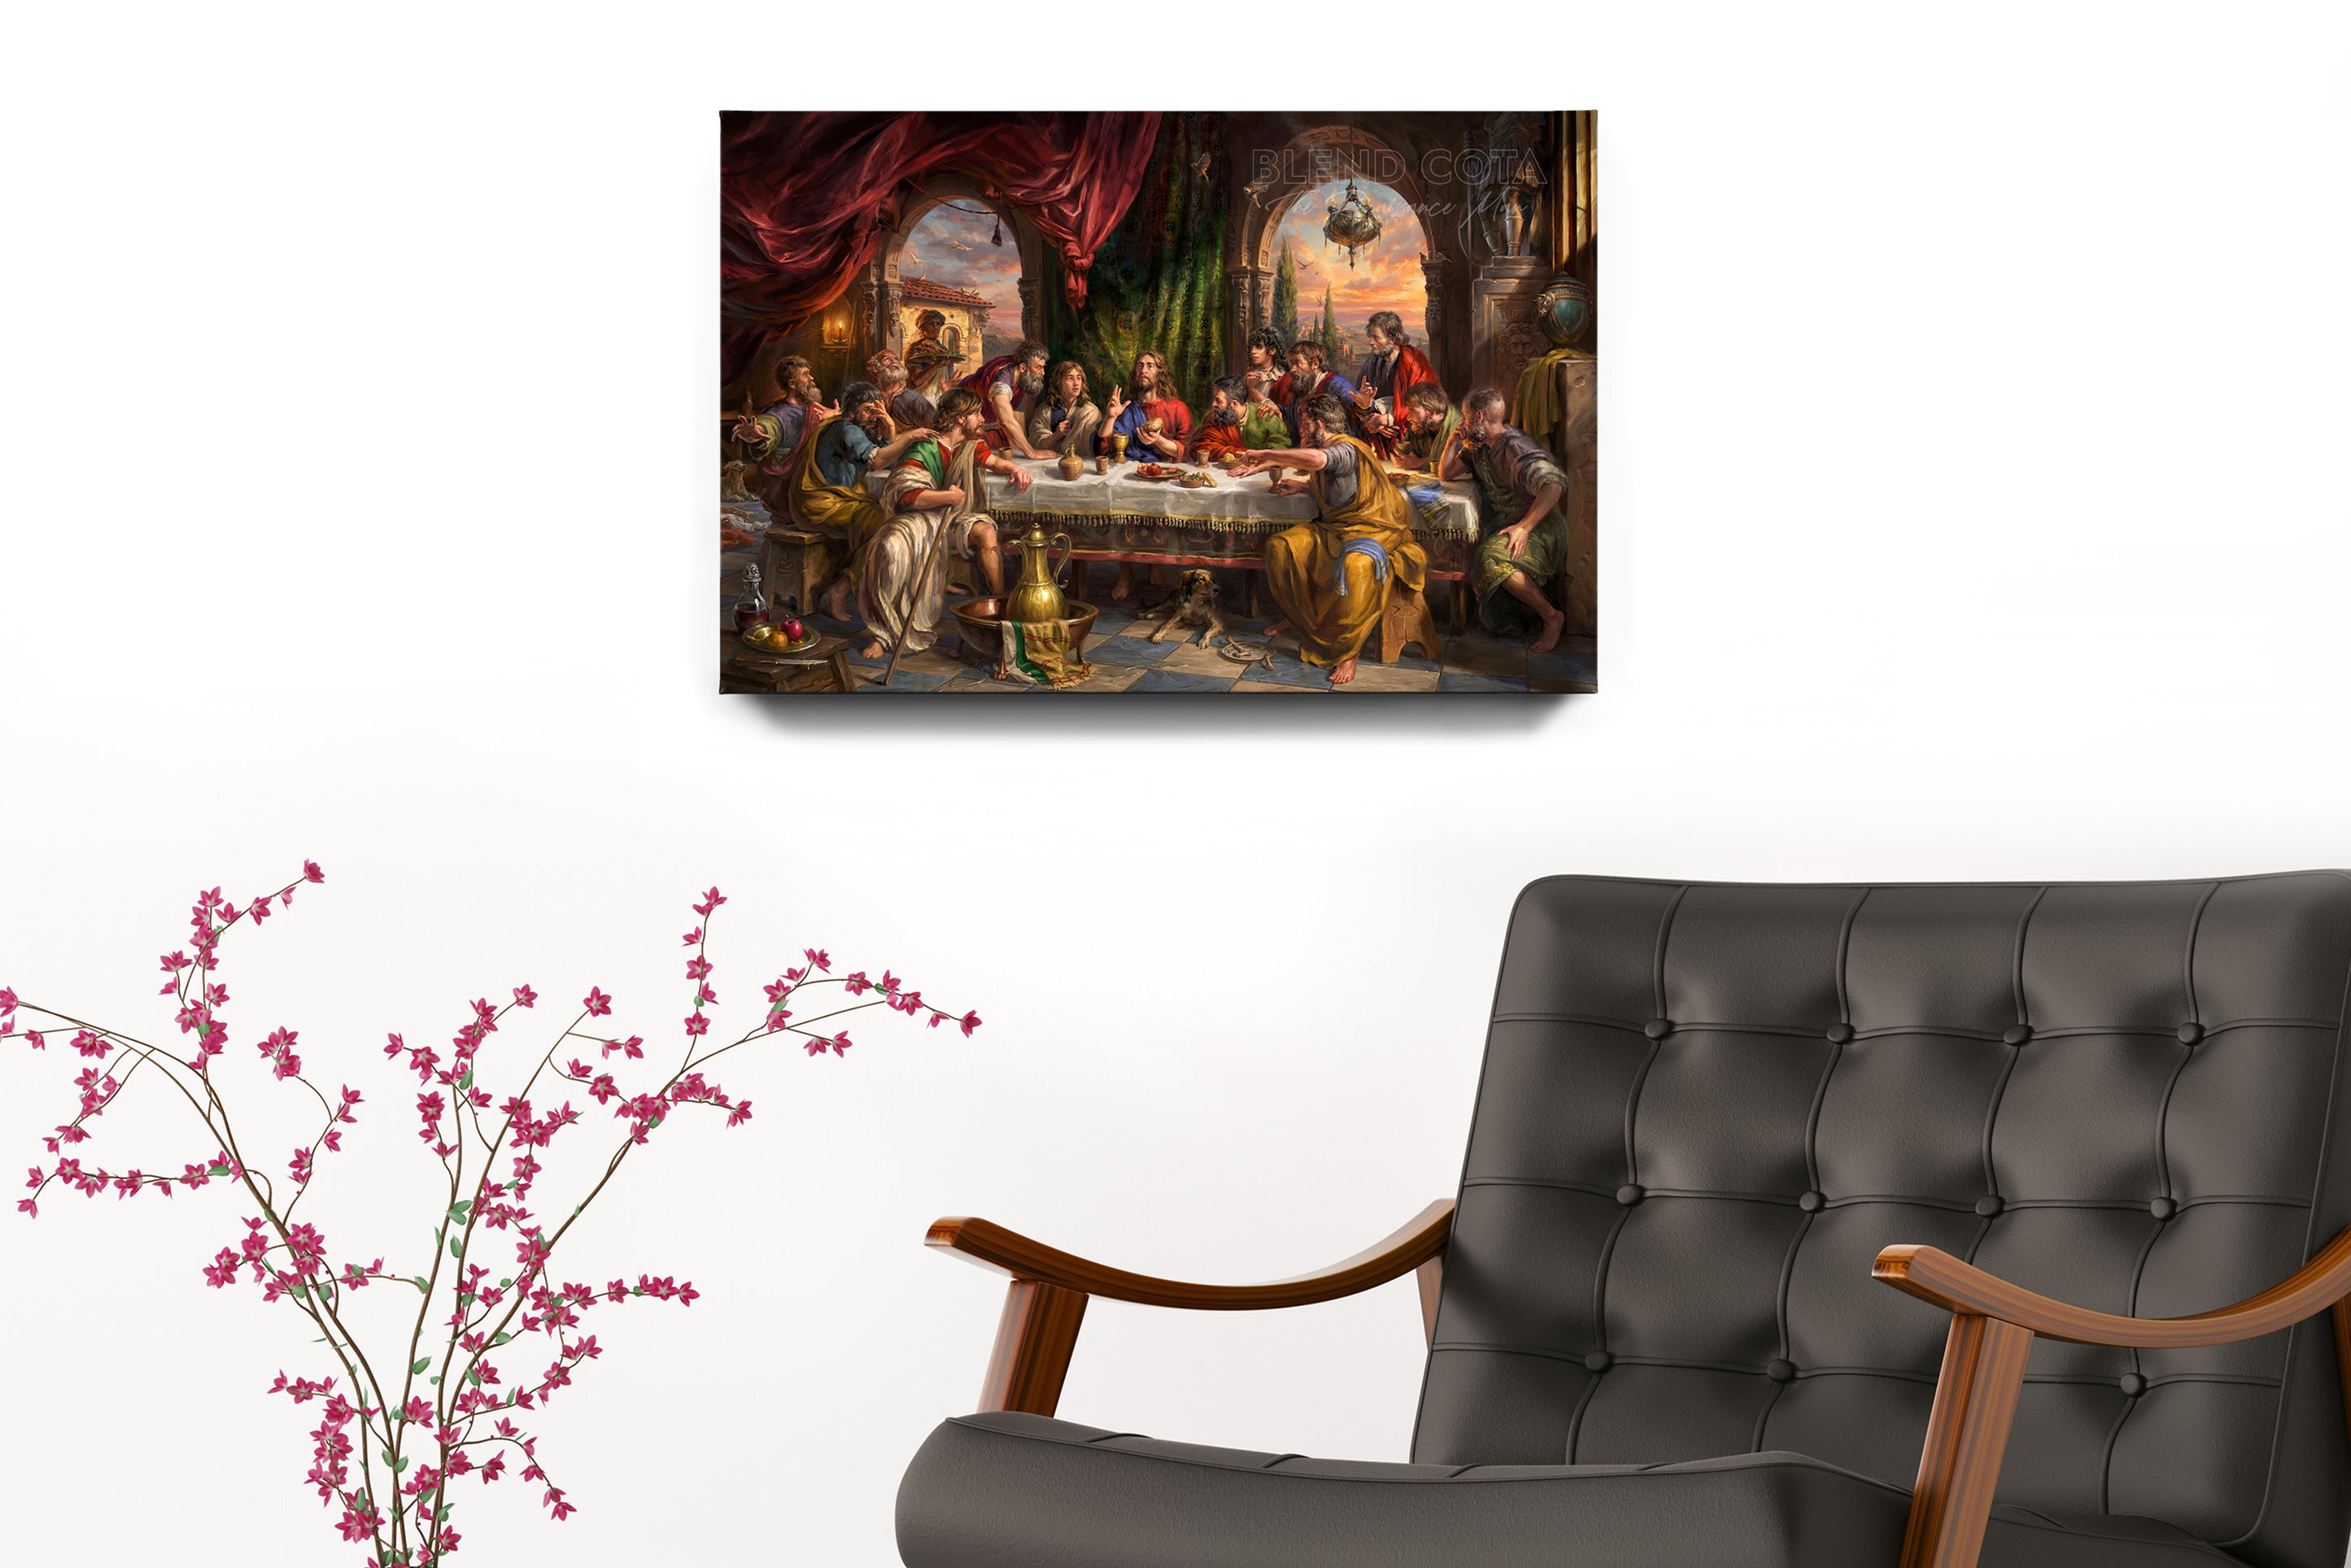 The Last Supper - Blend Cota Art Print on Cardstock - Blend Cota Studios painting hanging on a wall behind armchair